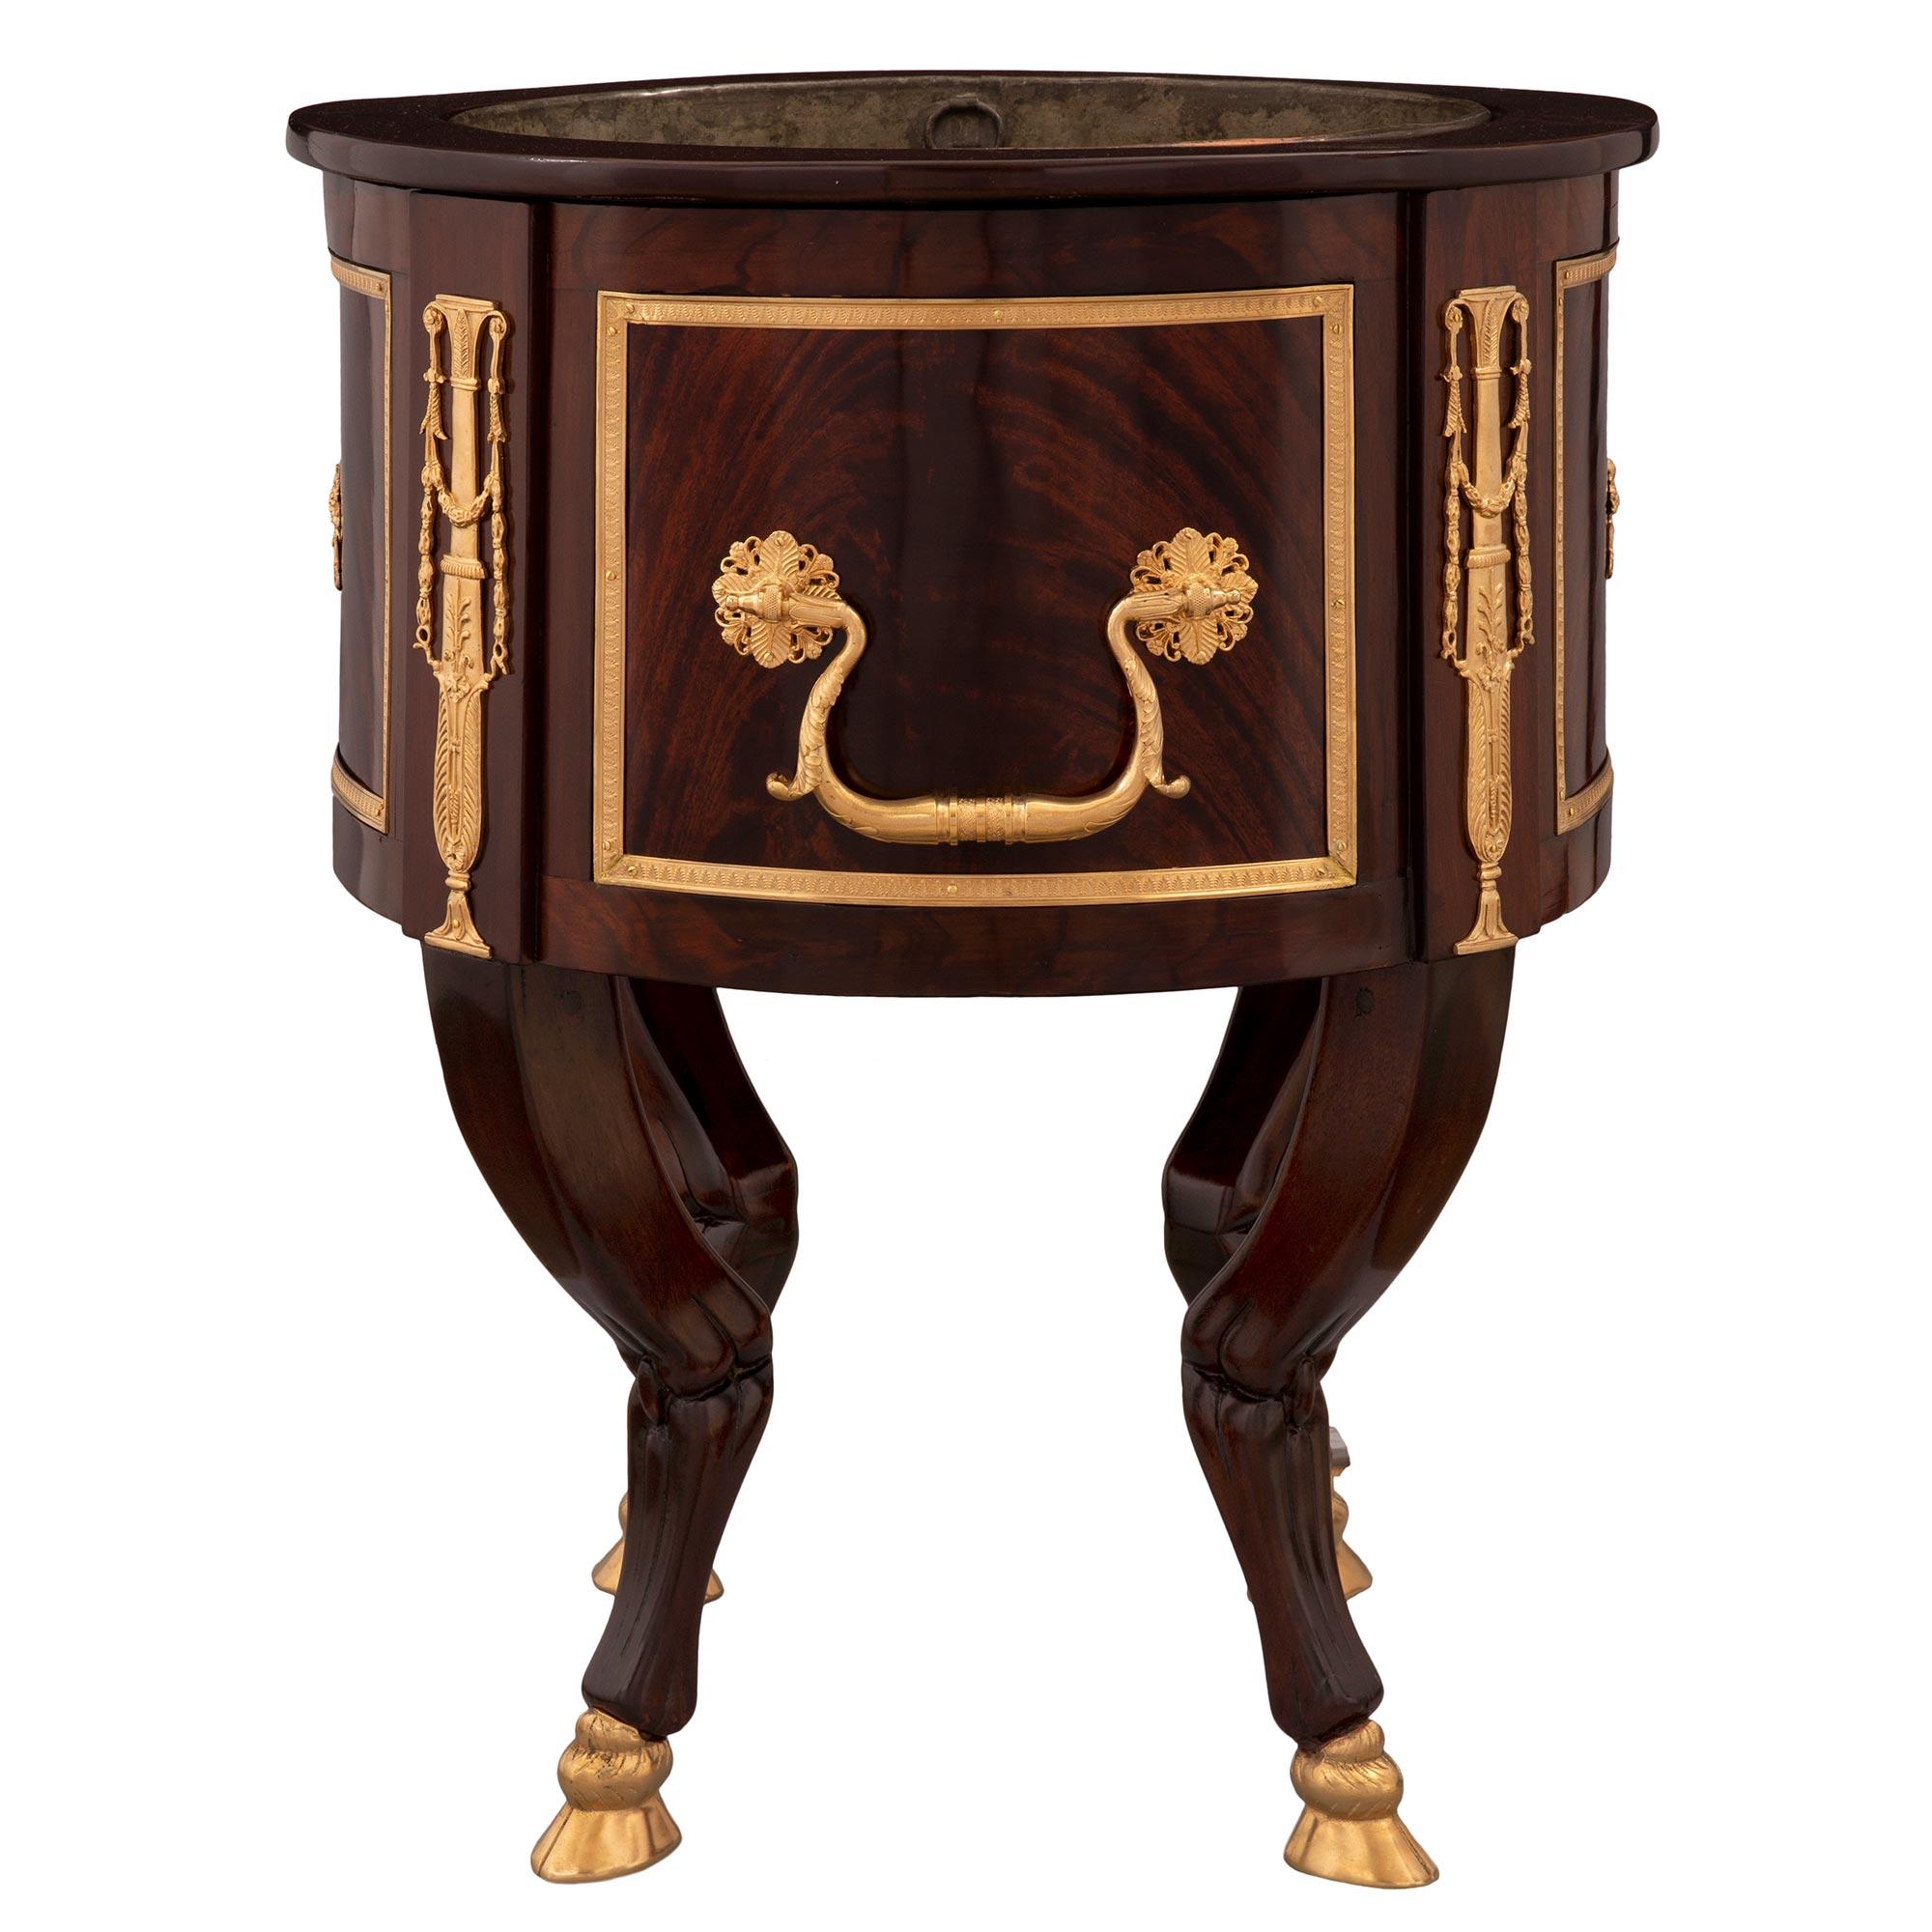 French 19th Century Neoclassical Style Mahogany and Ormolu Jardinière Planter For Sale 2